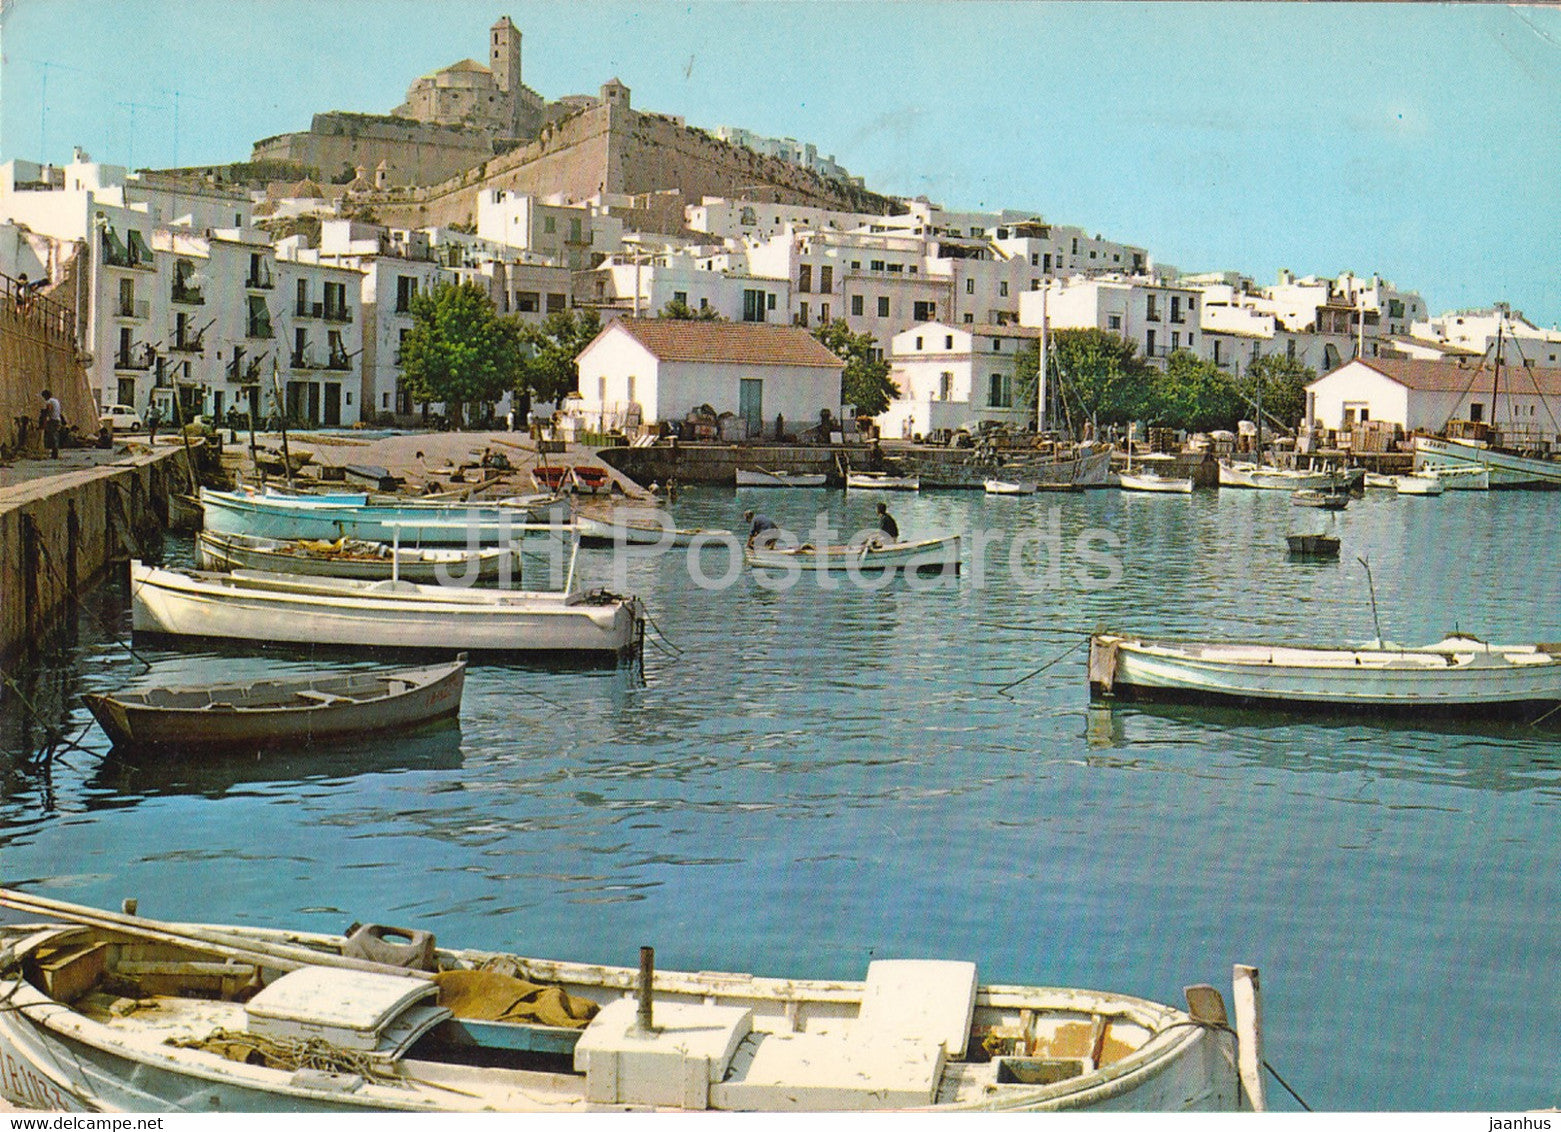 Ibiza - Detalle del Puerto y Catedral - Detail of the Harbour - Cathedral - boat - 213 - Spain - used - JH Postcards